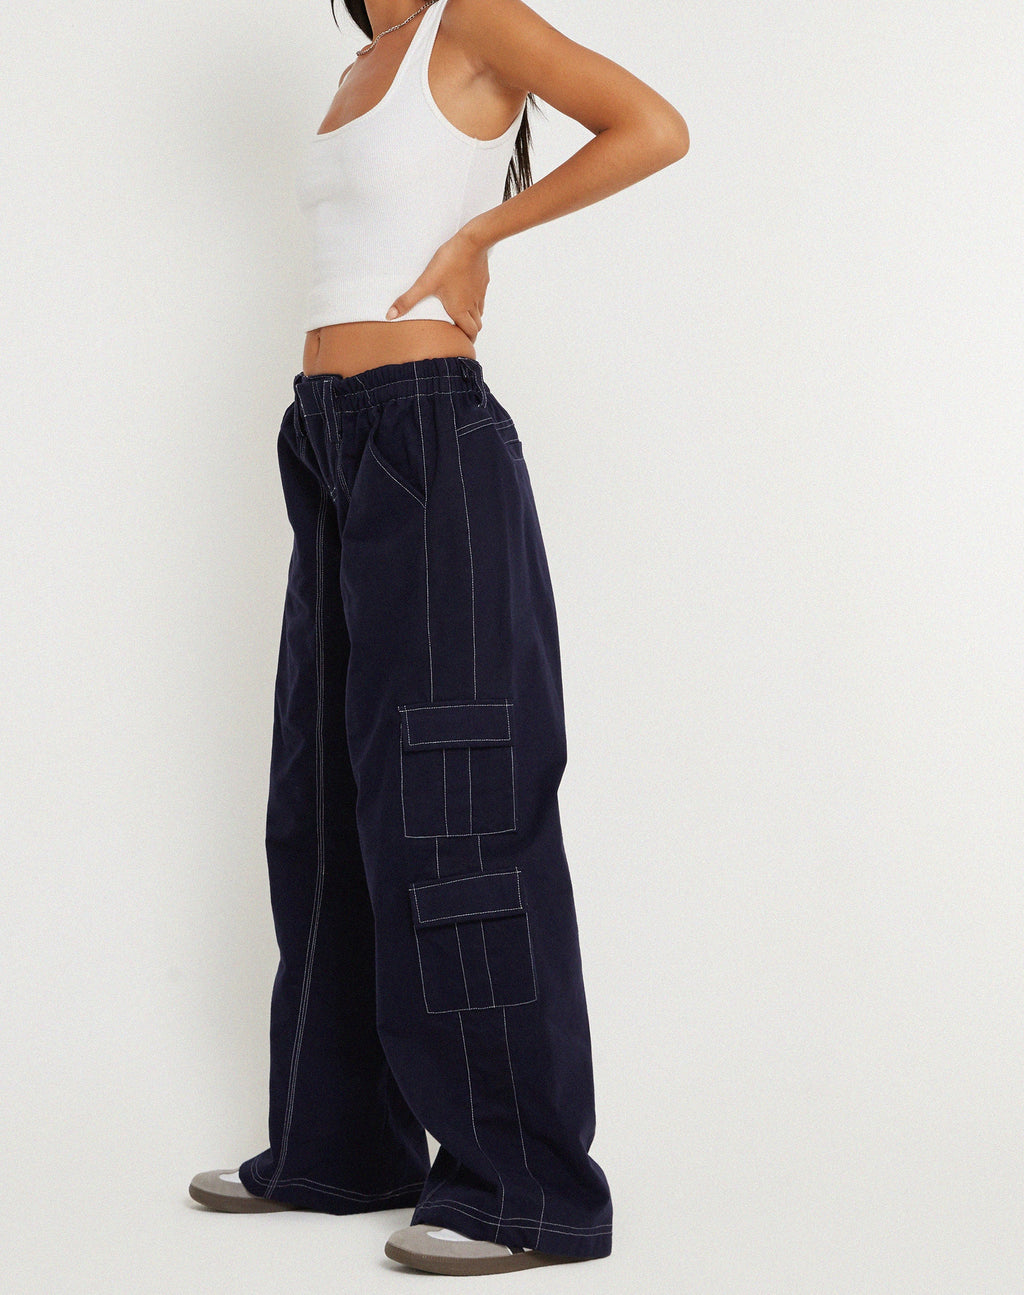 Hansa Trouser in Navy with Top White Stitch